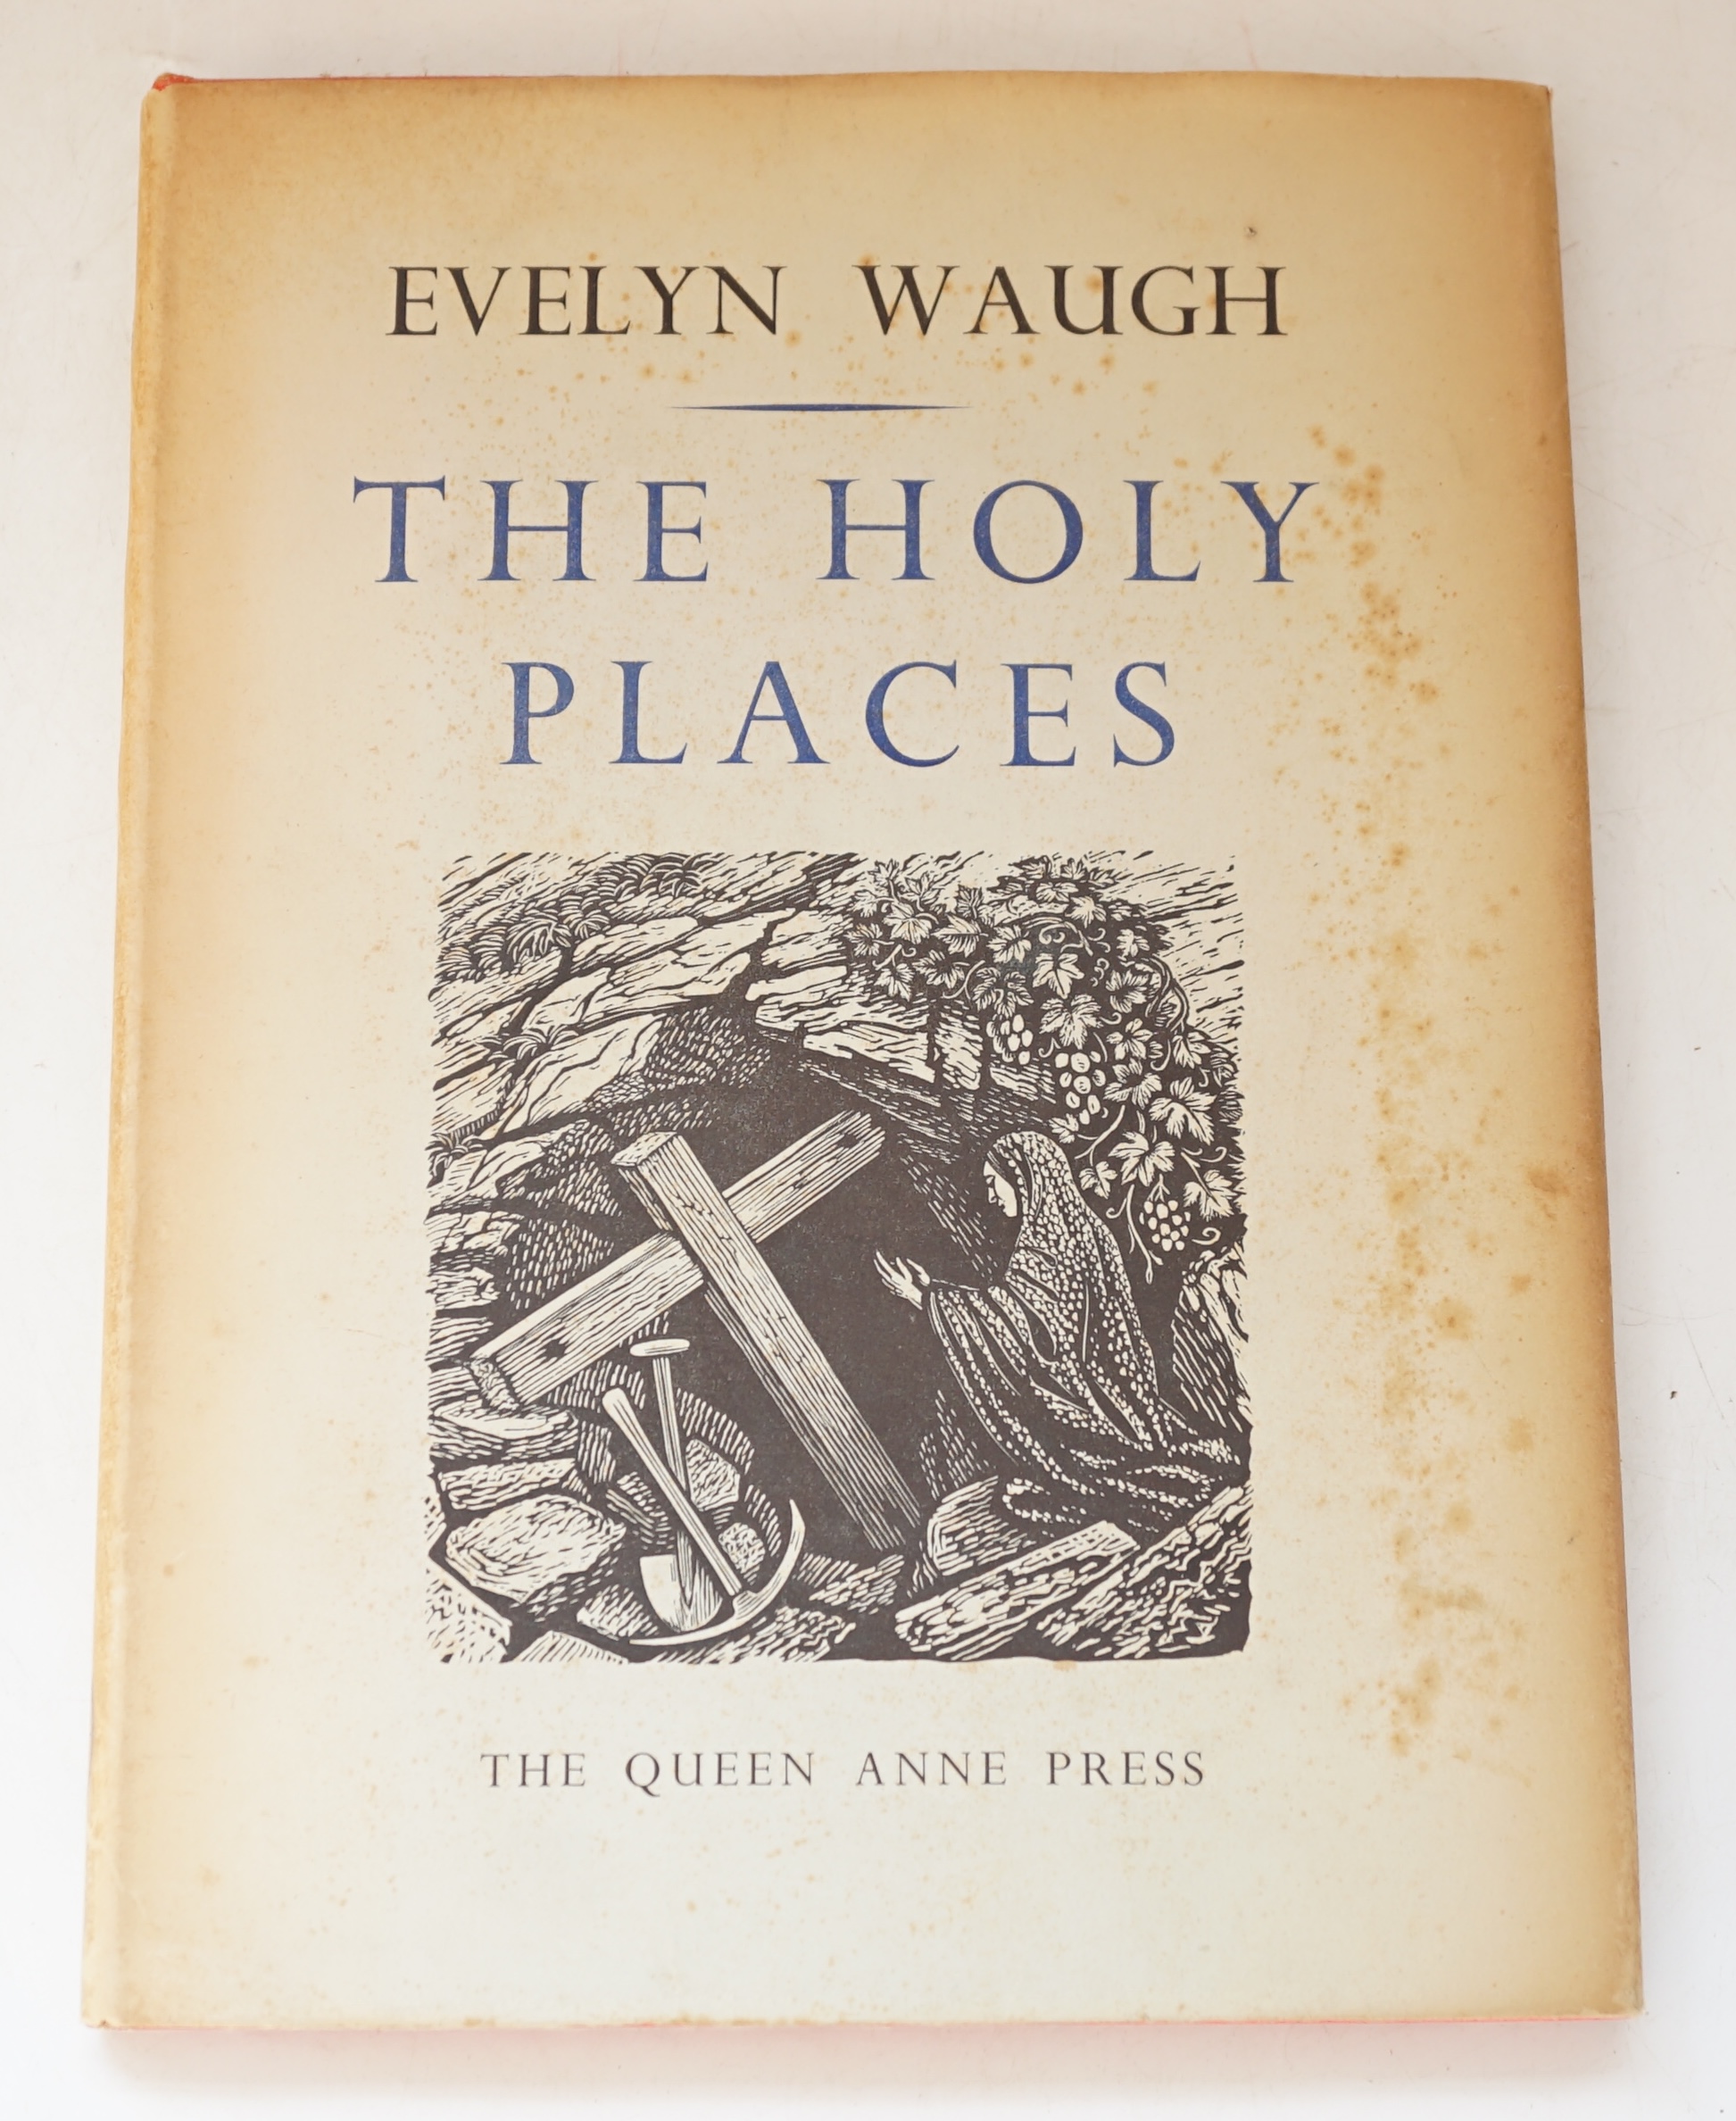 Waugh, Evelyn - The Holy Places, wood engravings by Reynolds Stone, 8vo, original red buckram stamped in gilt, with d/j, limited edition number 276 of 950 copies of Waugh's travelogue of his 1951 visit through Israel and